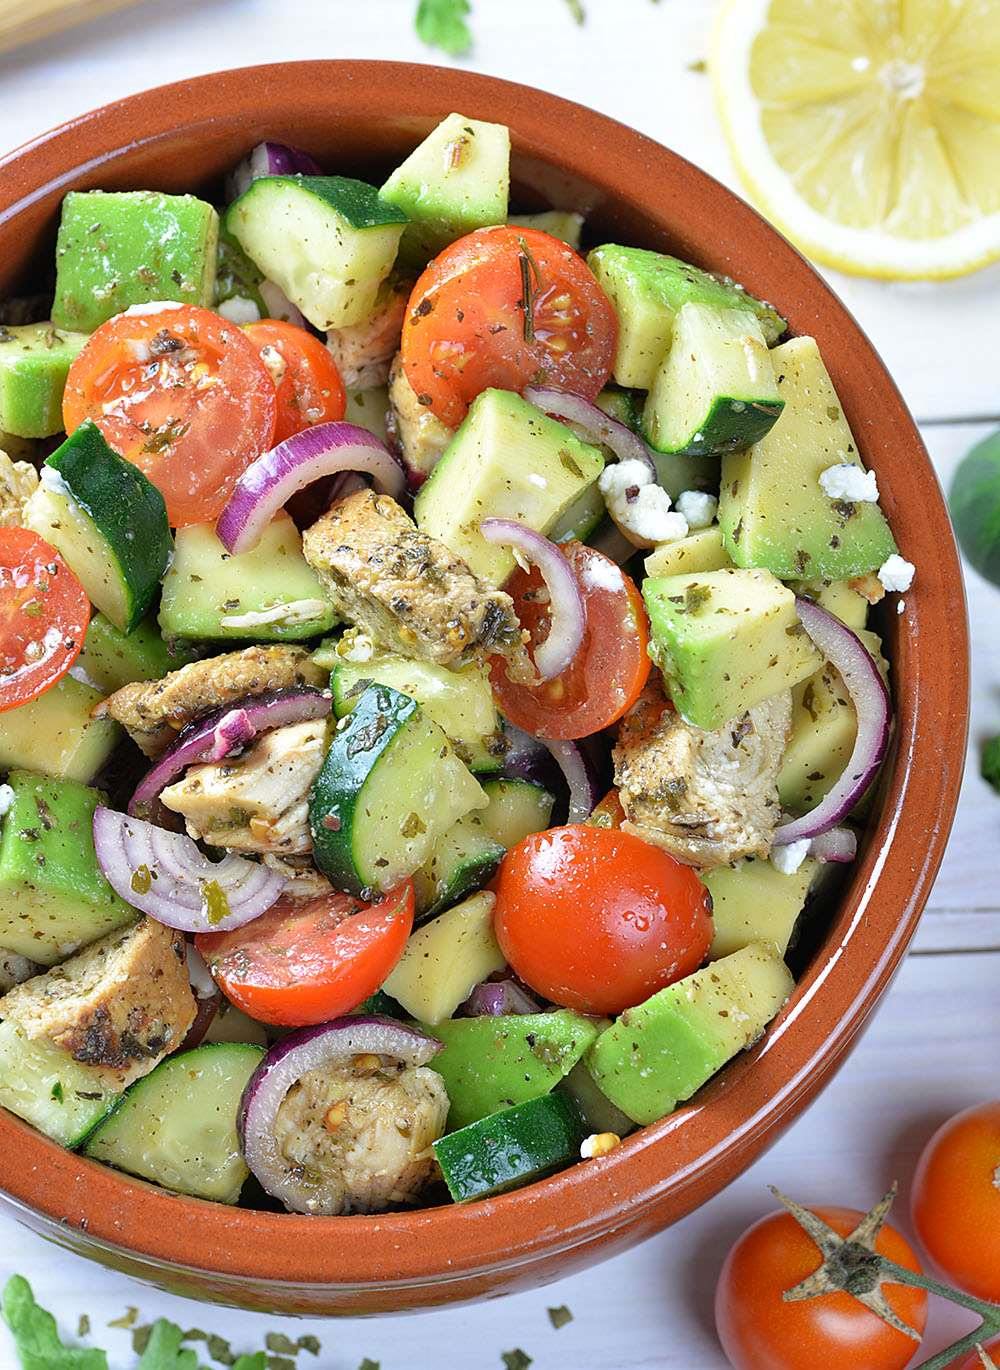 Healthy Chicken, Cucumber, Tomato and Avocado Salad is QUICK and EASY RECIPE for lunch, family dinner or party food for a crowd.